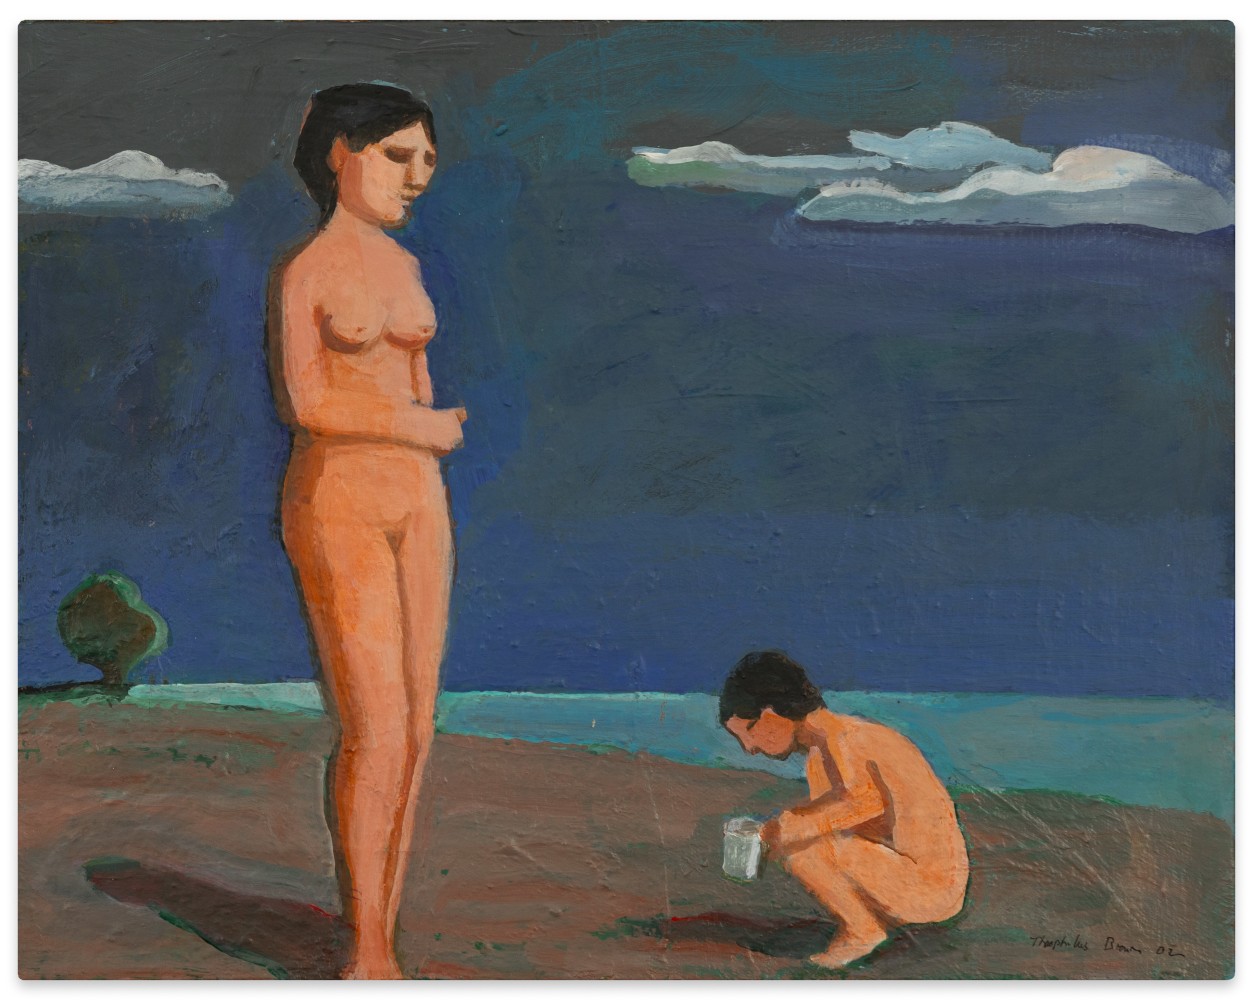 William T. Brown (Nudes with Tree)(Woman and Child), 2002 acrylic on canvas 11 x 14 in.